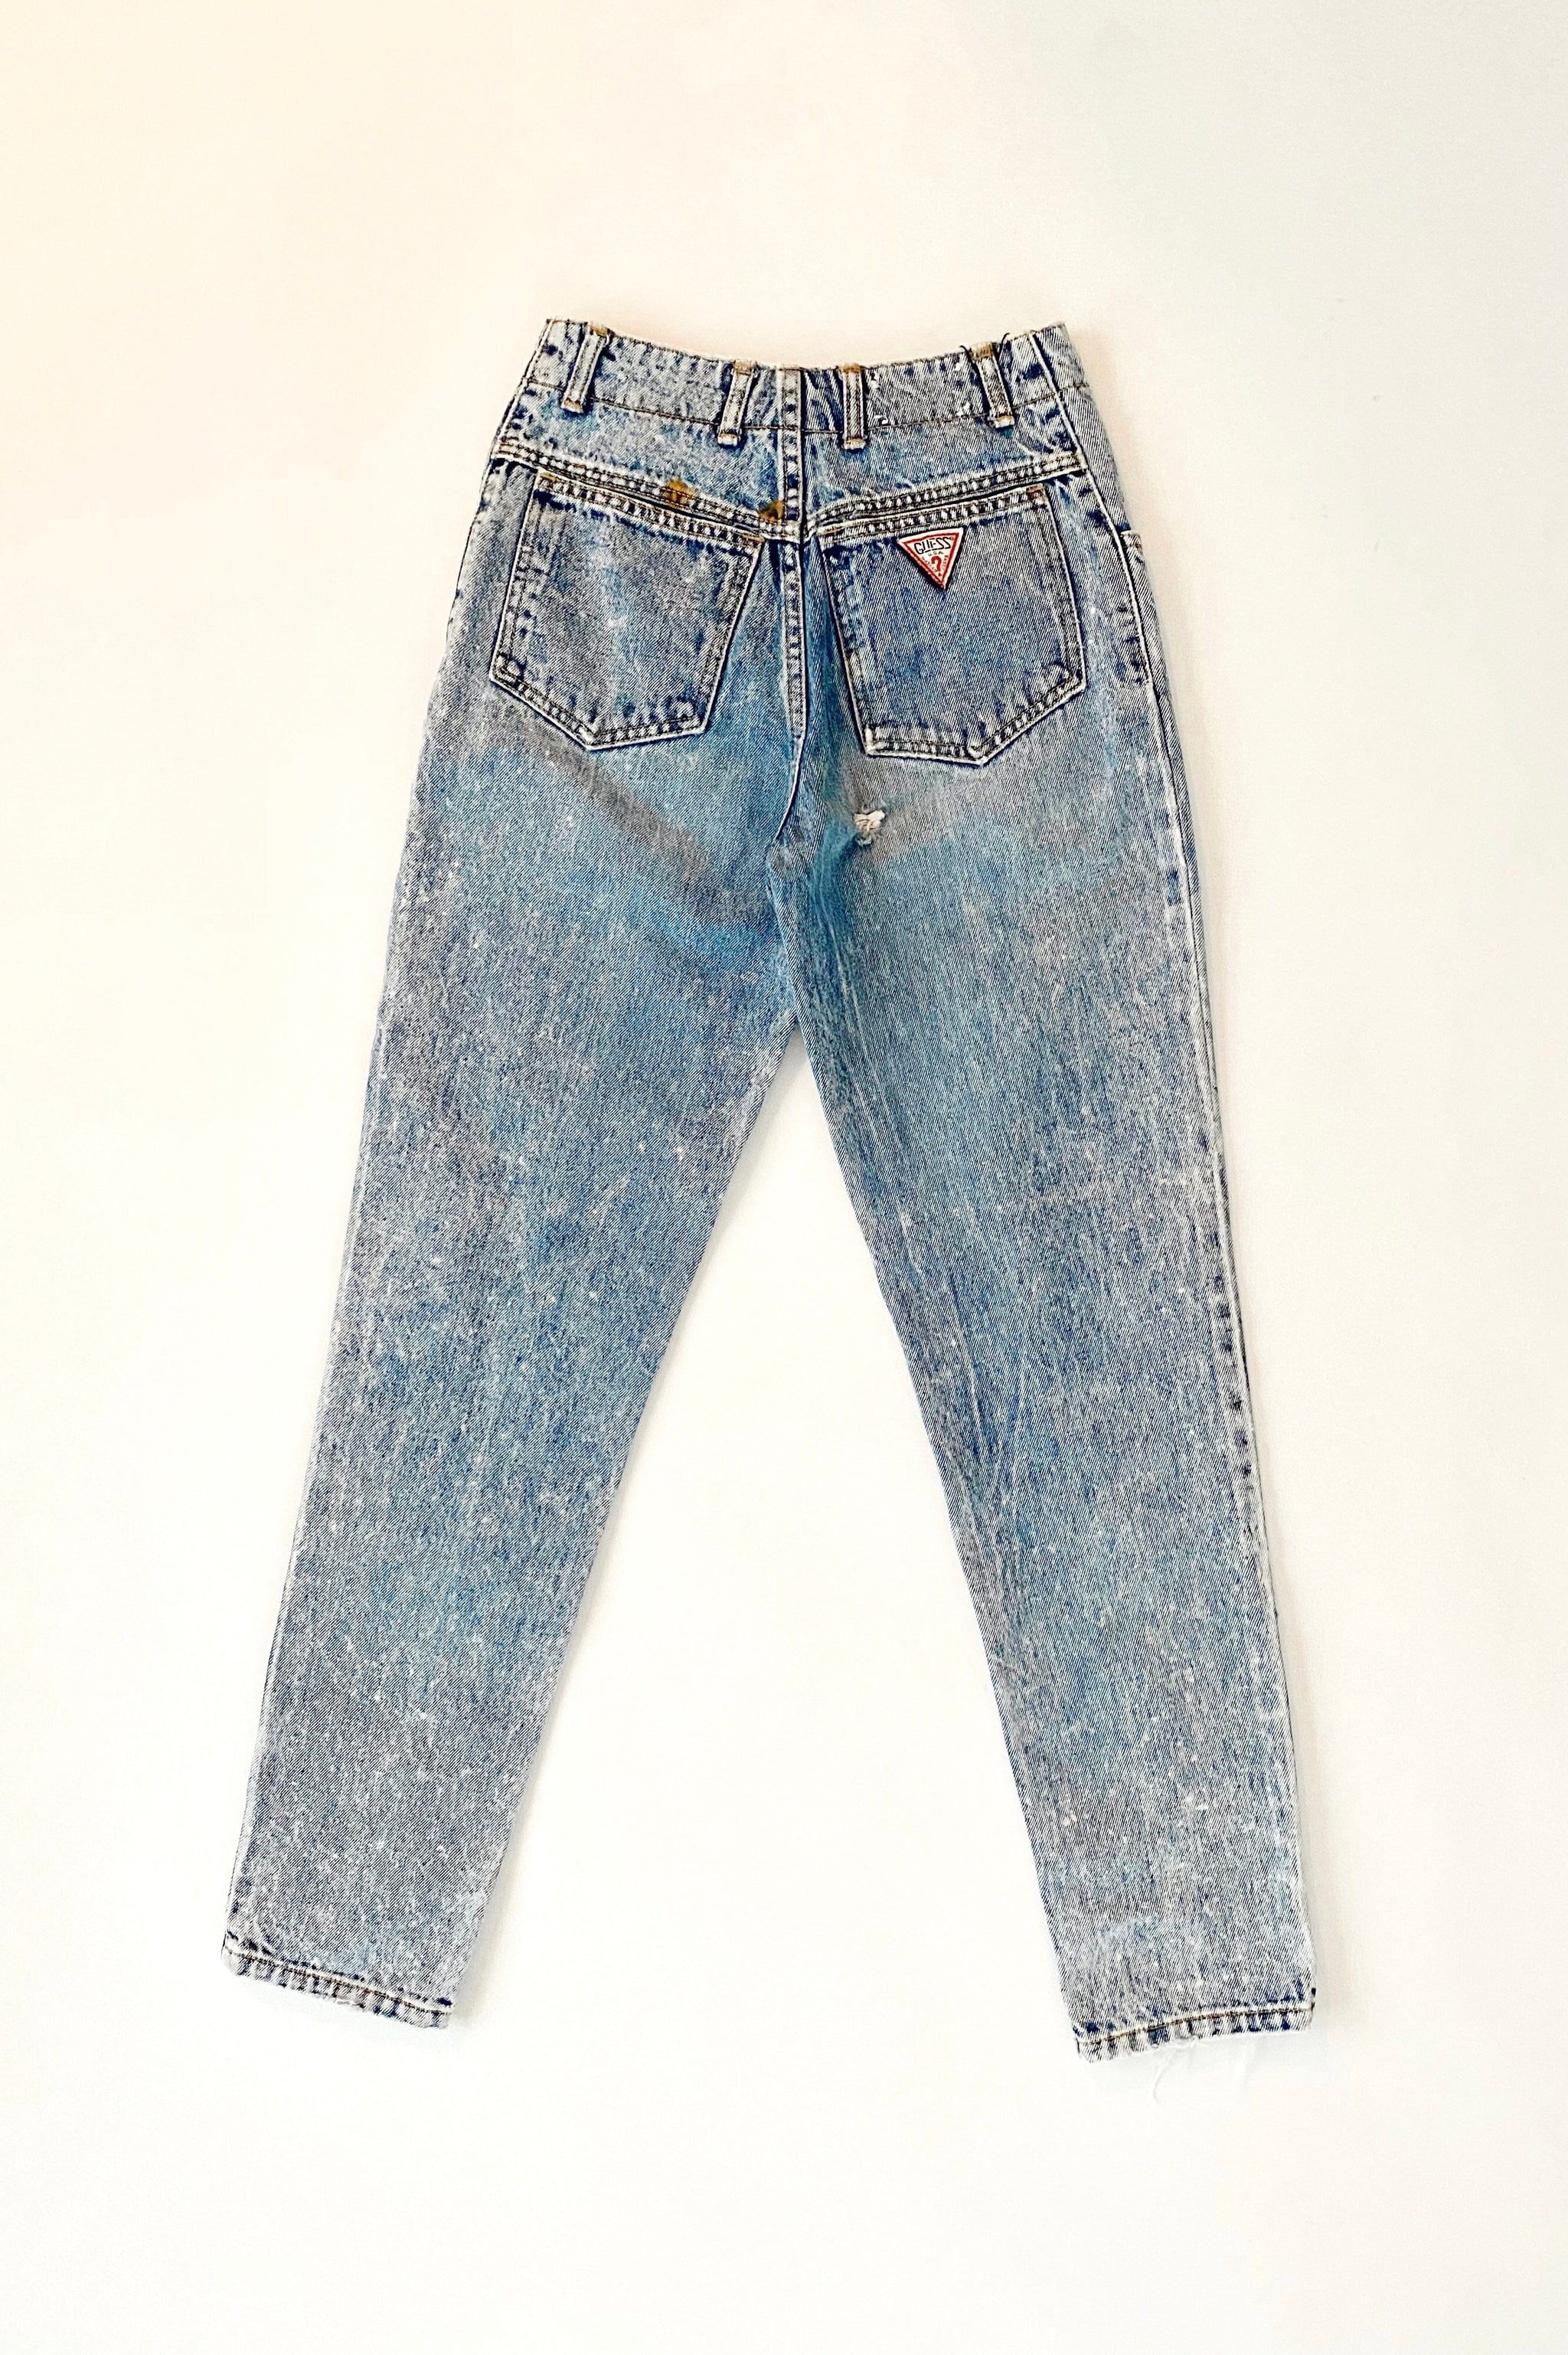 Vermomd Maakte zich klaar rijst 80s Vintage Guess by Georges Marciano High Waist Jeans / Size 26 - COUTONIC